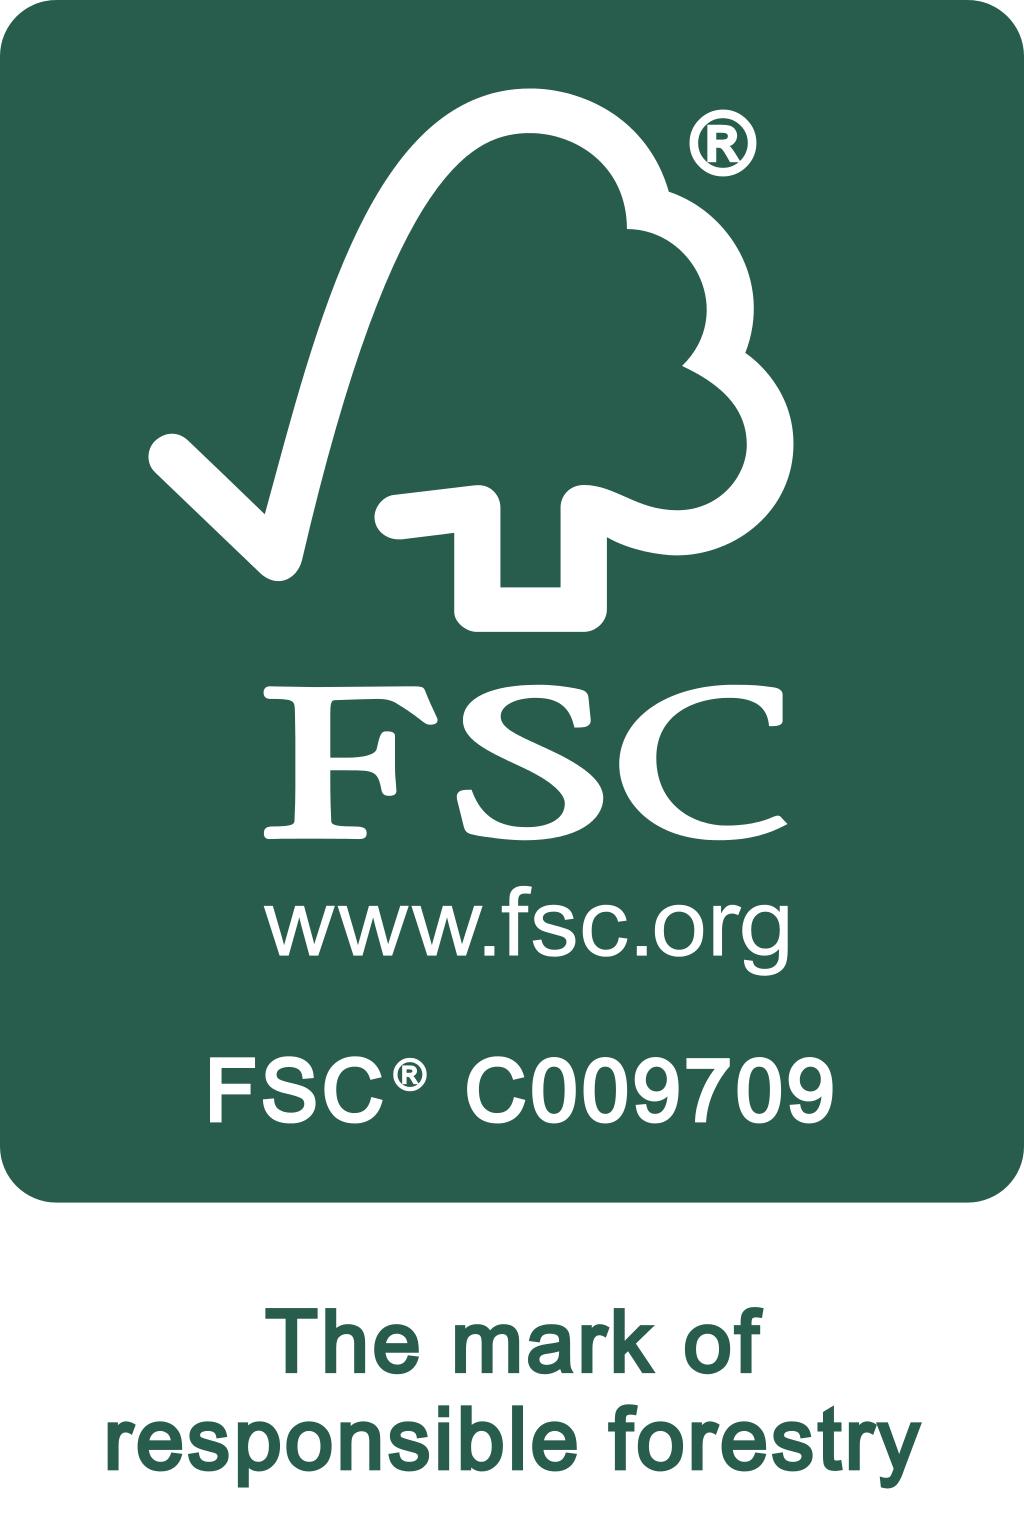 the fsc logo is the mark of responsible forestry